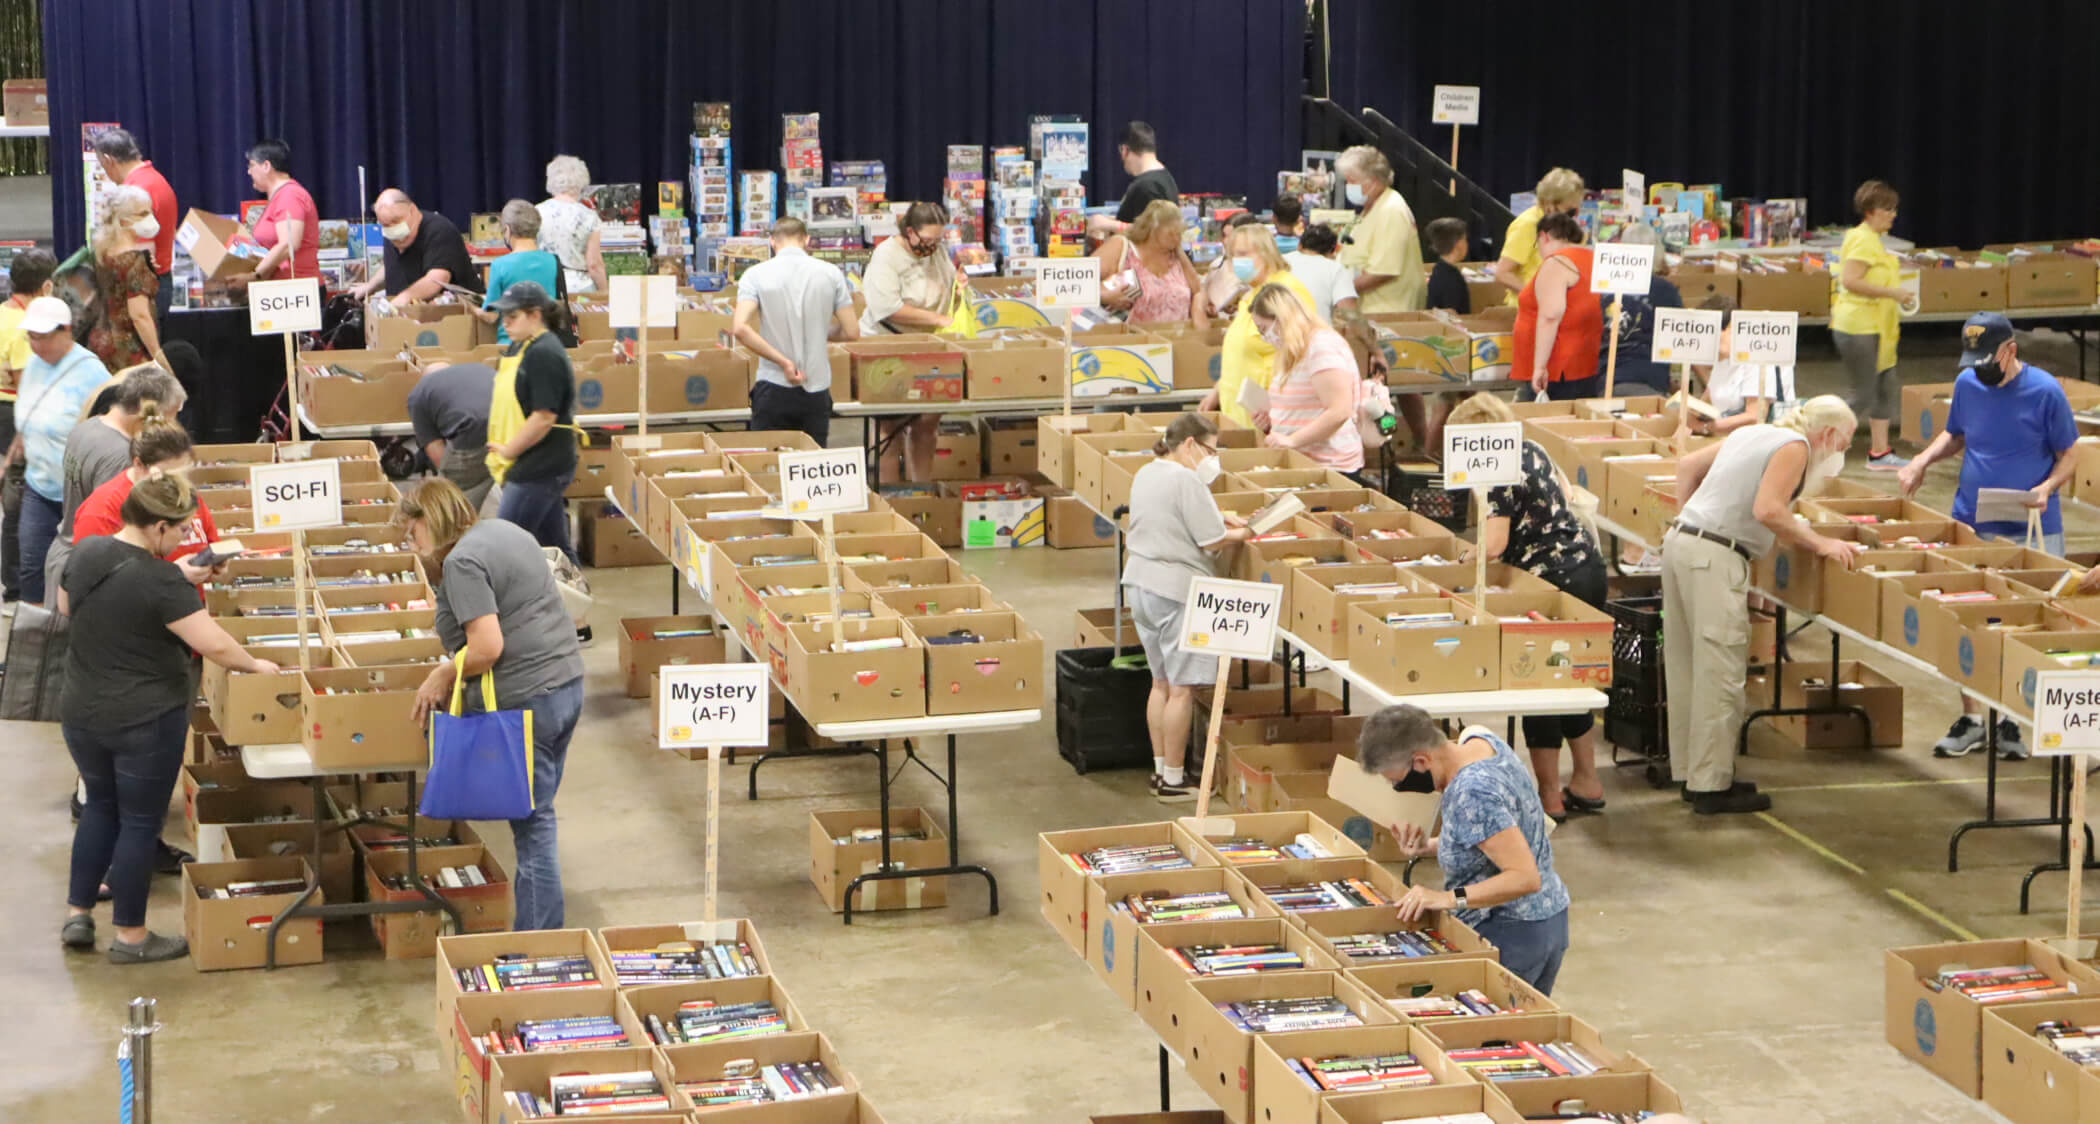 Guests exploring the boxes at the October Mega Sale 2021